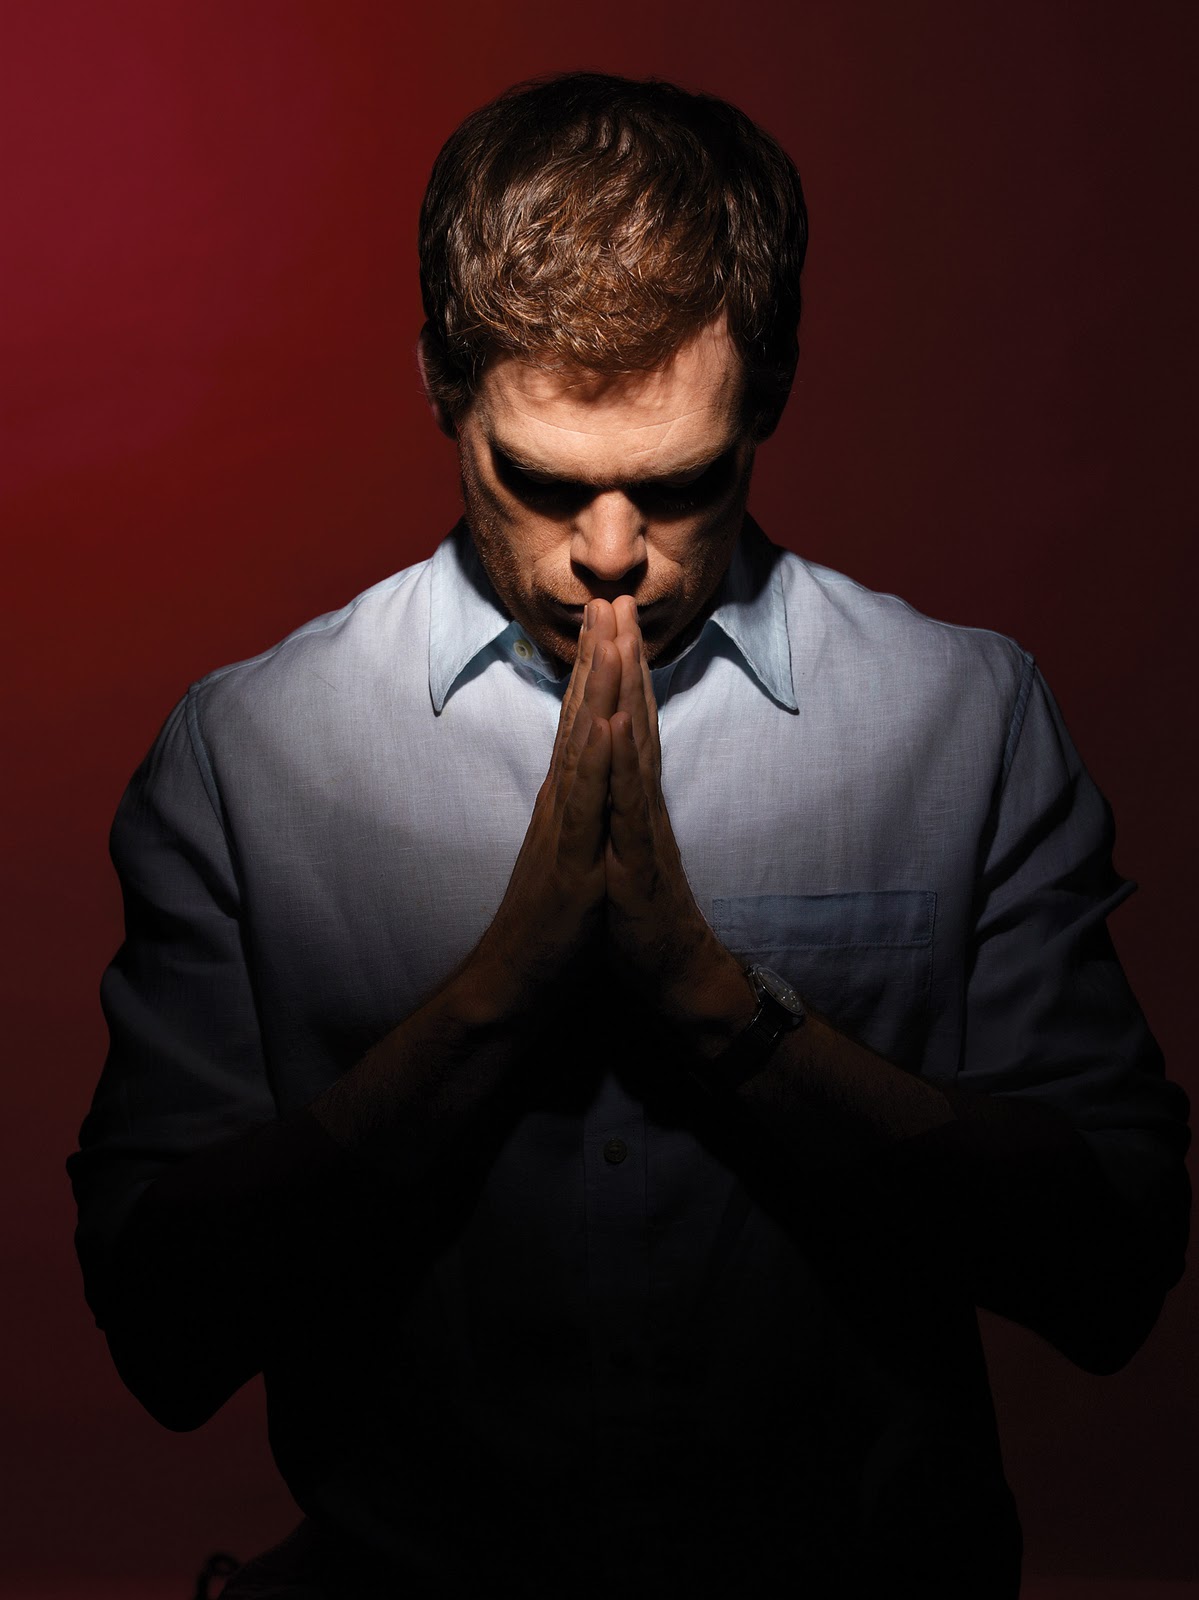 New Promotional Posters Dexter Tv Show Weekly News